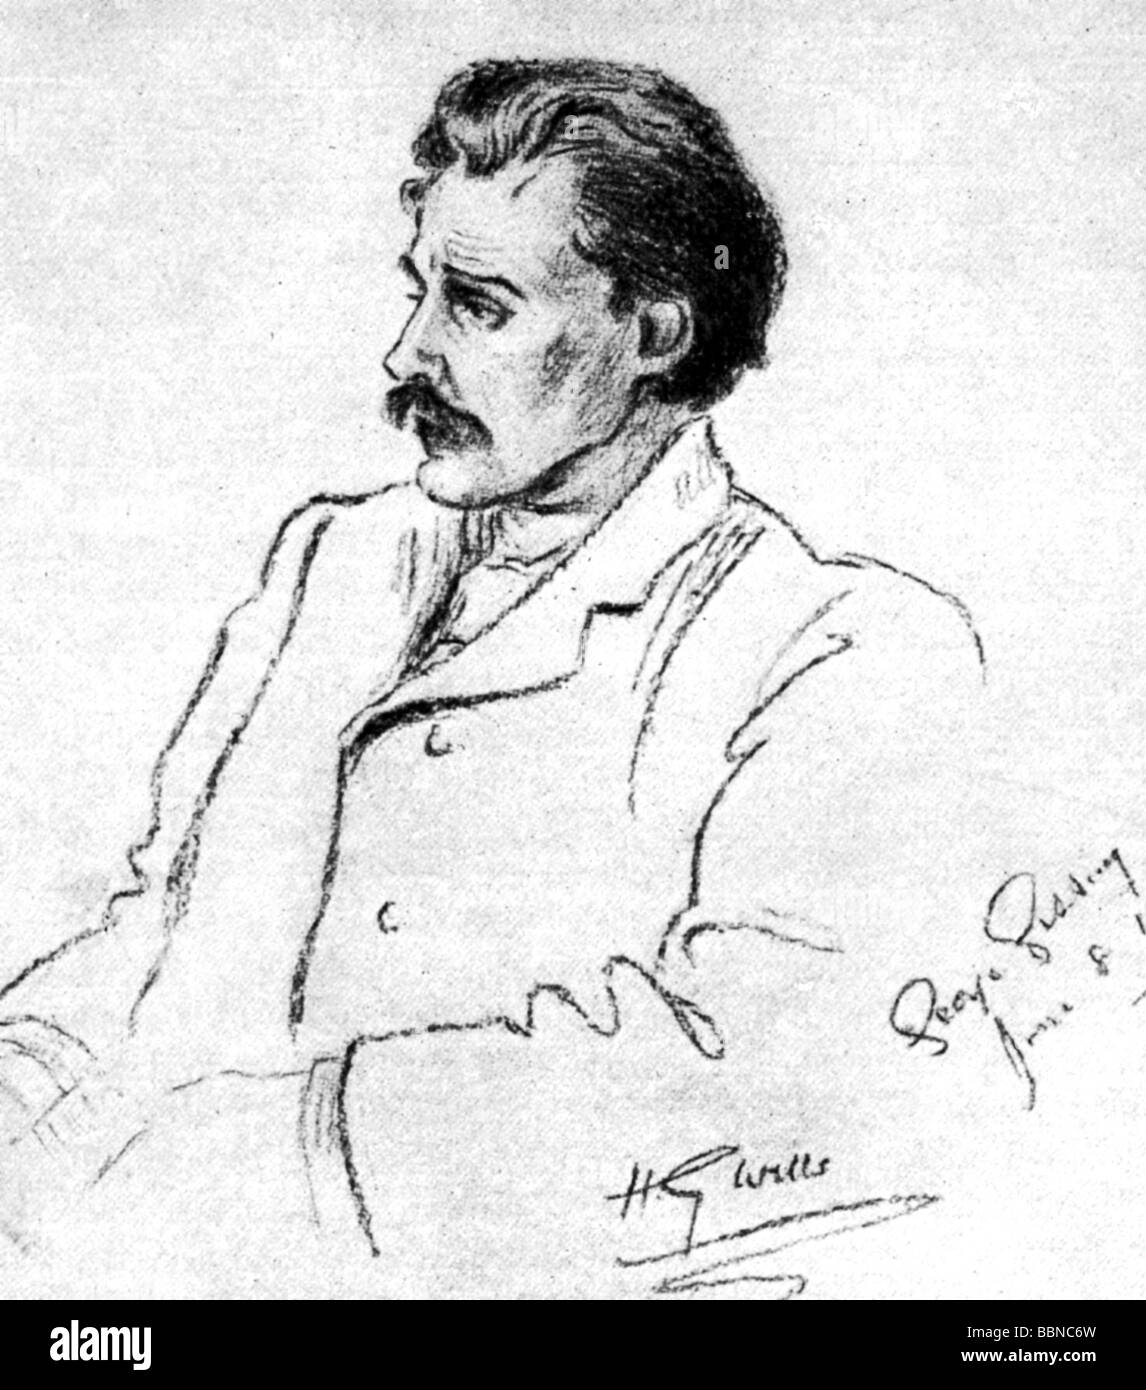 Gissing, George Robert, 22.11.1857 - 28.12.1903, British author / writer, portrait, drawing by H. G. Wells, 8.6.1901, Stock Photo